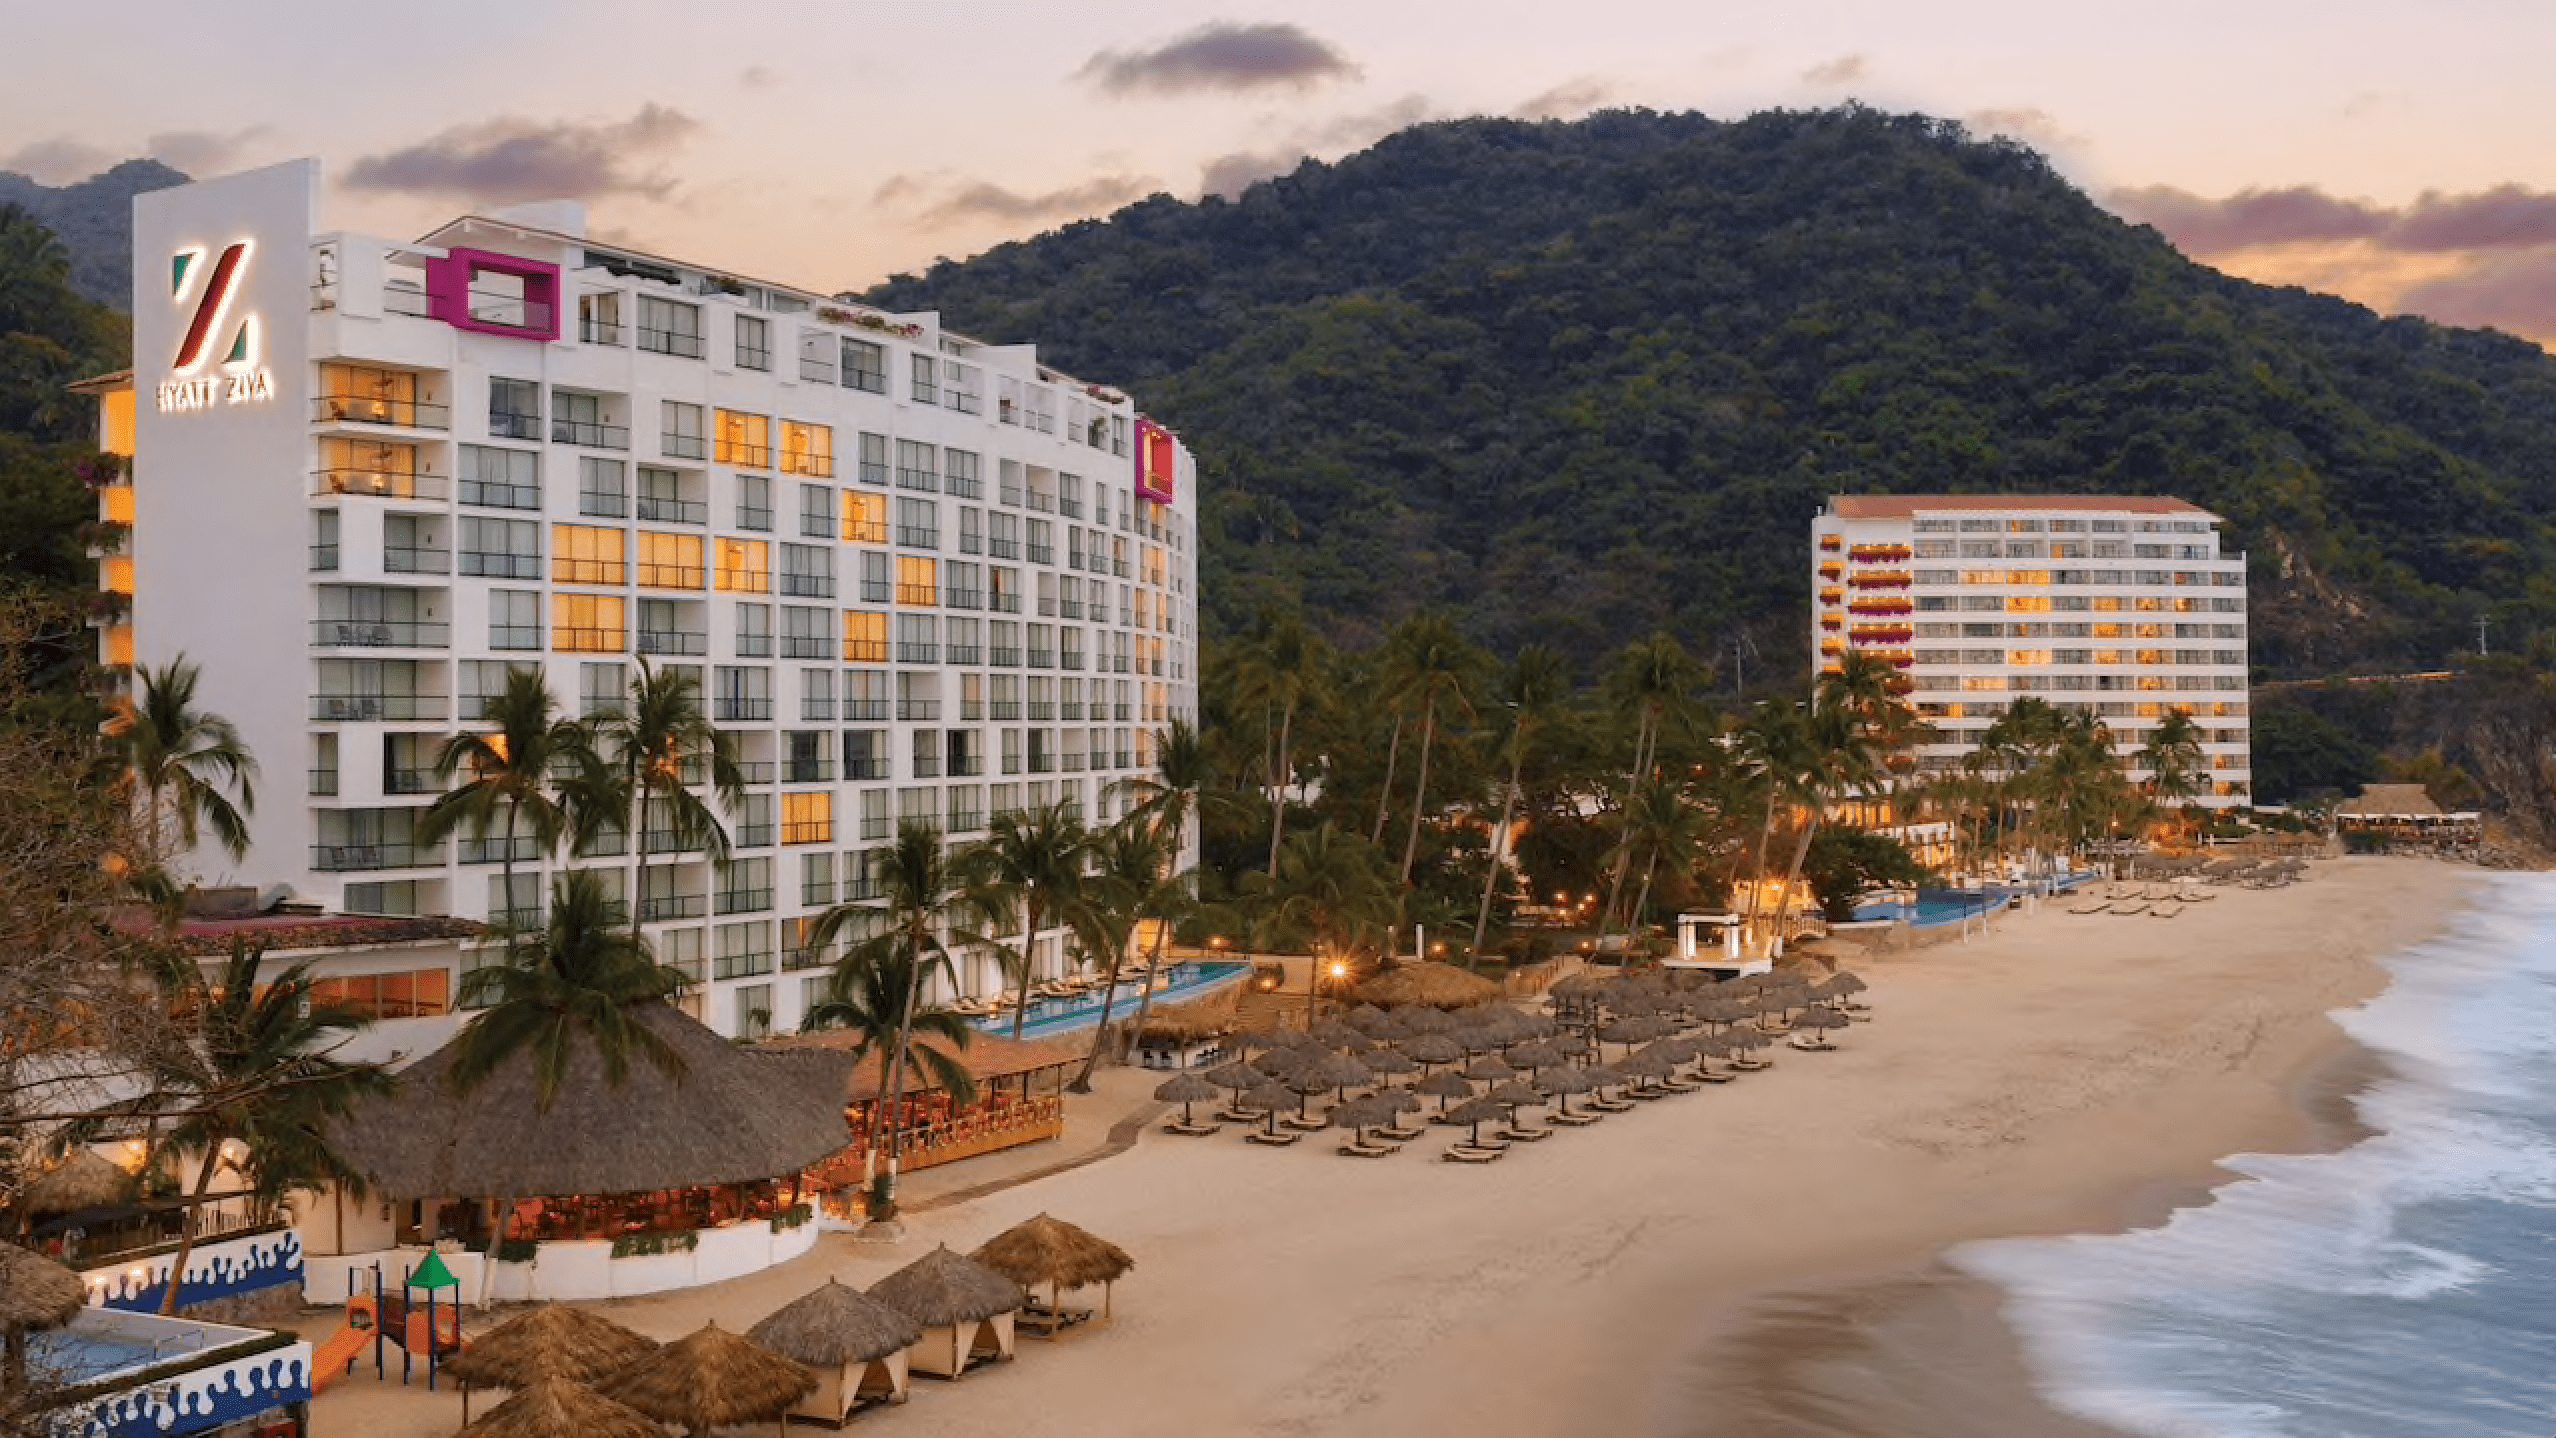 Hyatt Ziva Puerto Vallarta - Don&rsquo;t transfer points: It may be better to book an all-inclusive resort through your credit card portal